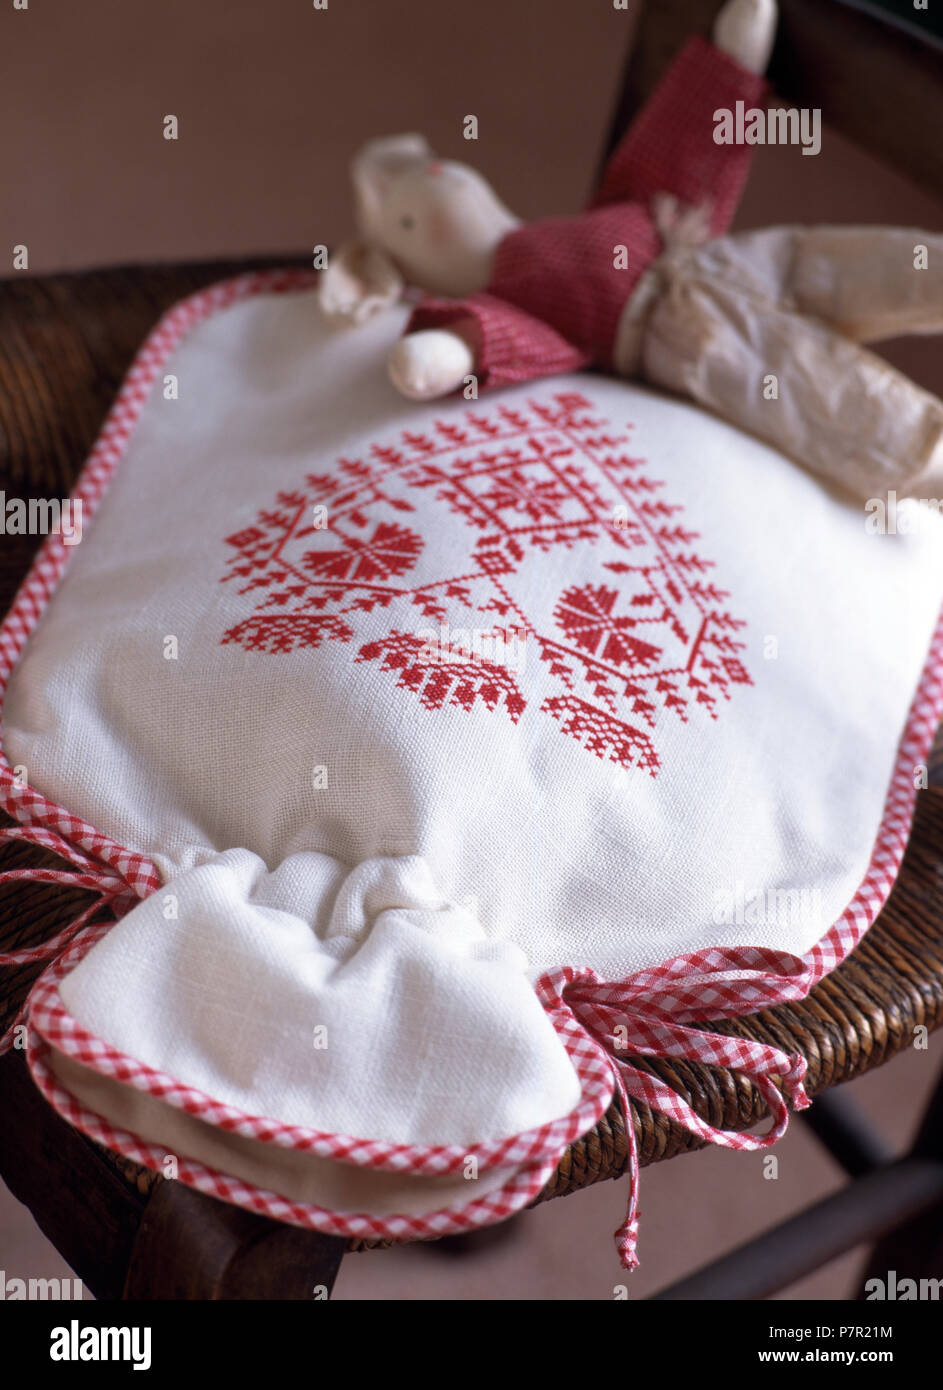 Close-up of a white hot water bottle cover with red cross stitch decoration Stock Photo